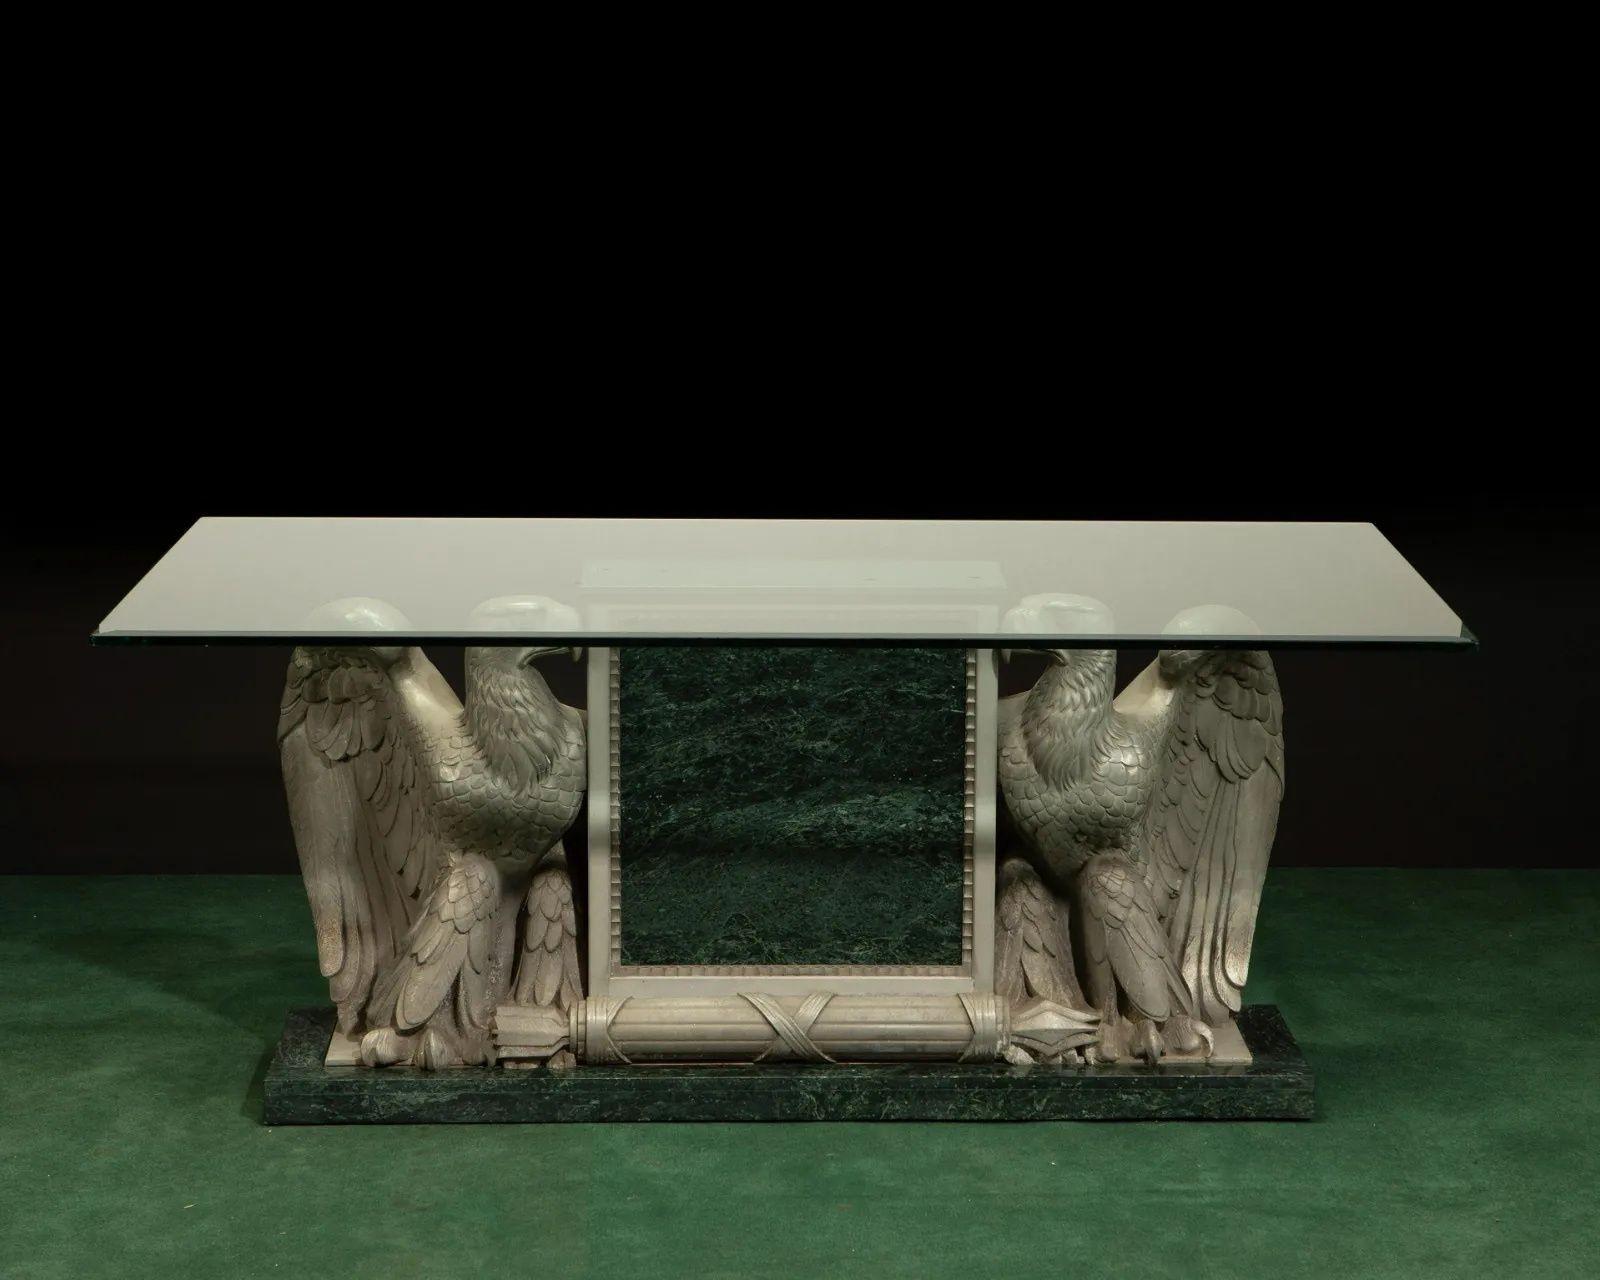 Late 19th century.
The double-eagle galvanized/zinc metal base with marble trim and glass top.
Created in England from a vintage architectural double-eagle element. 
 
 
Dimensions:
 
29